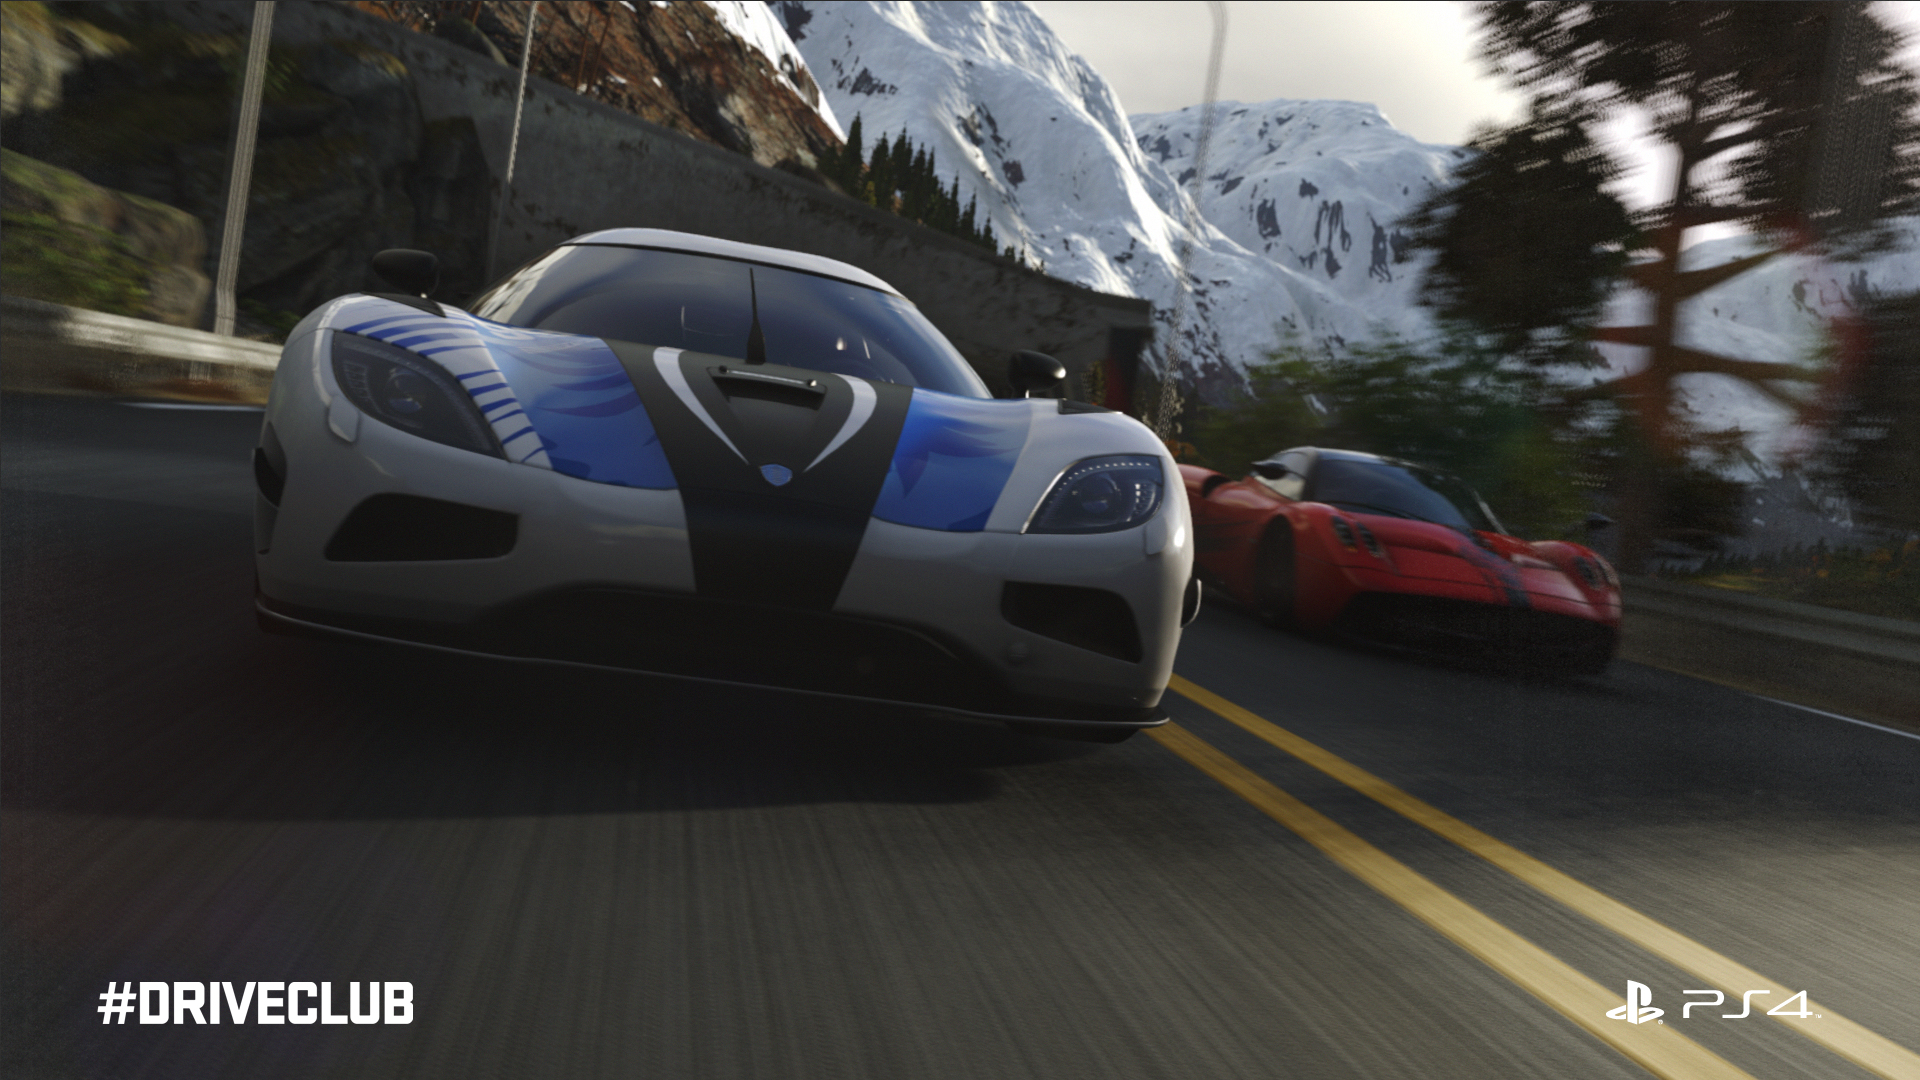 Driveclub is being pulled from PSN at 